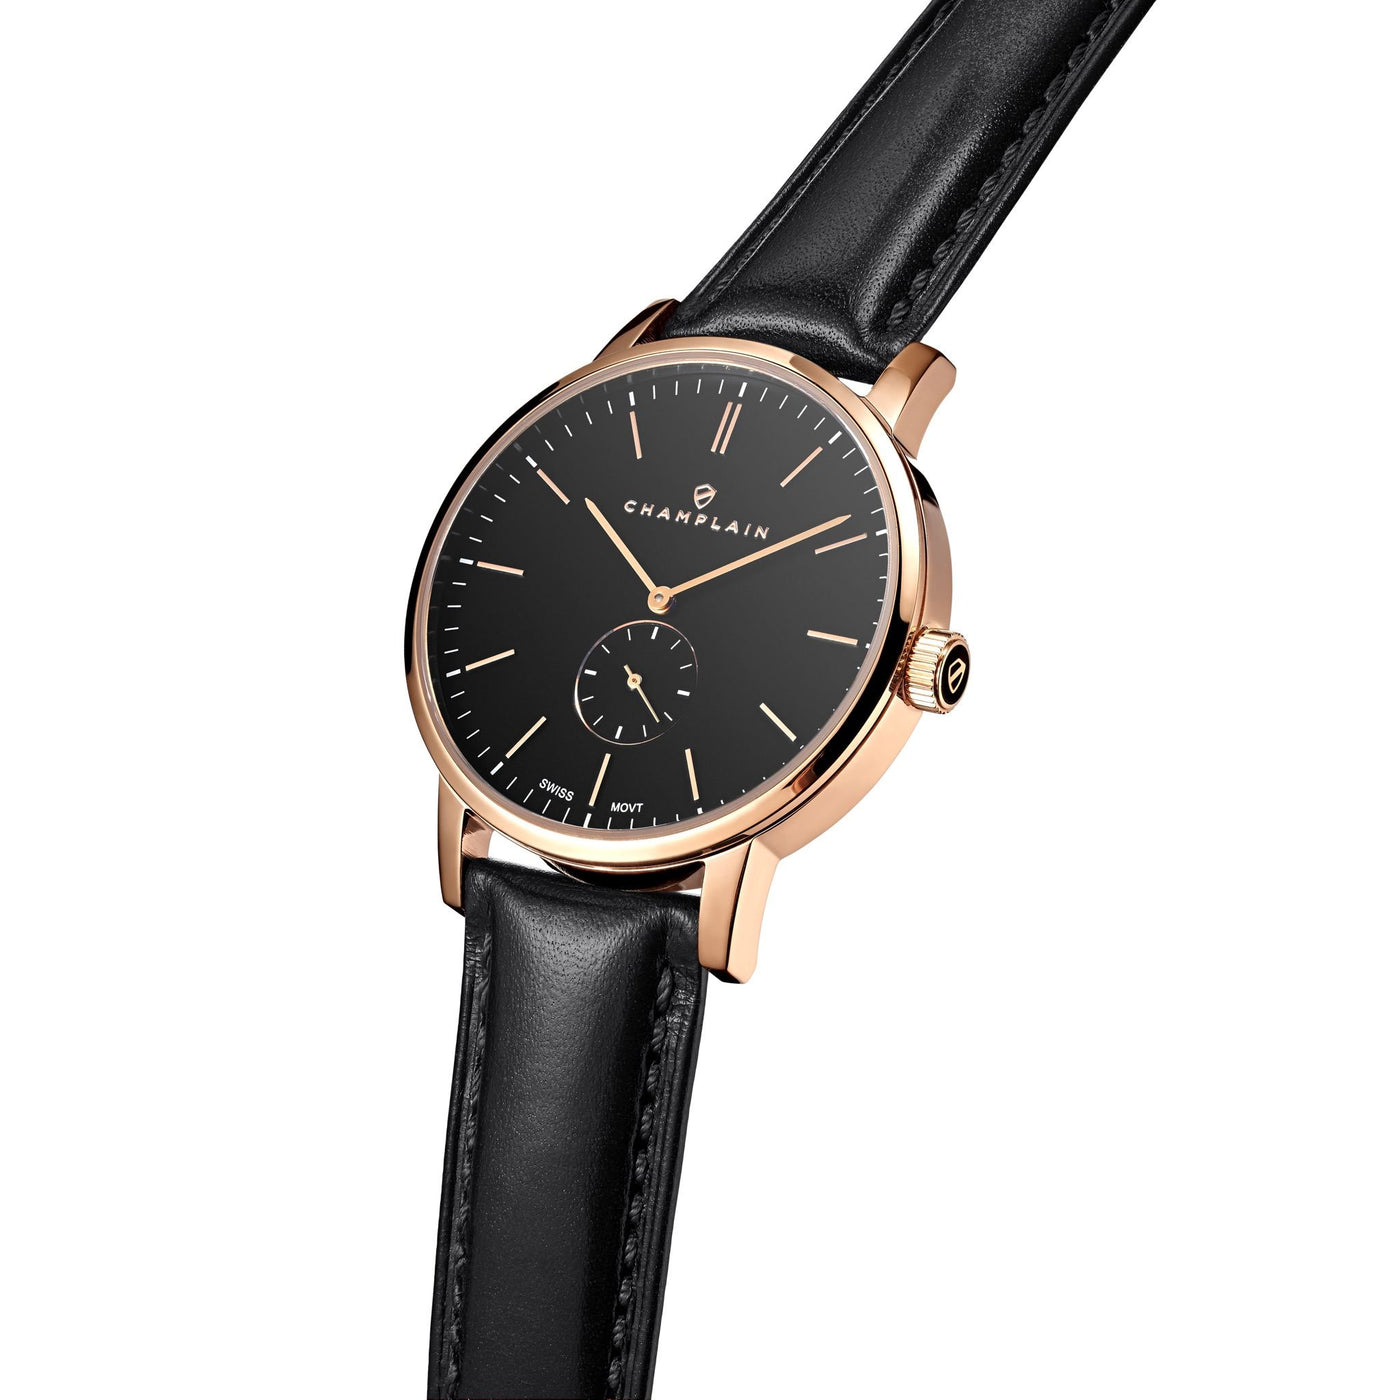 Rose Gold/Black - Black Governor Watch by Champlain